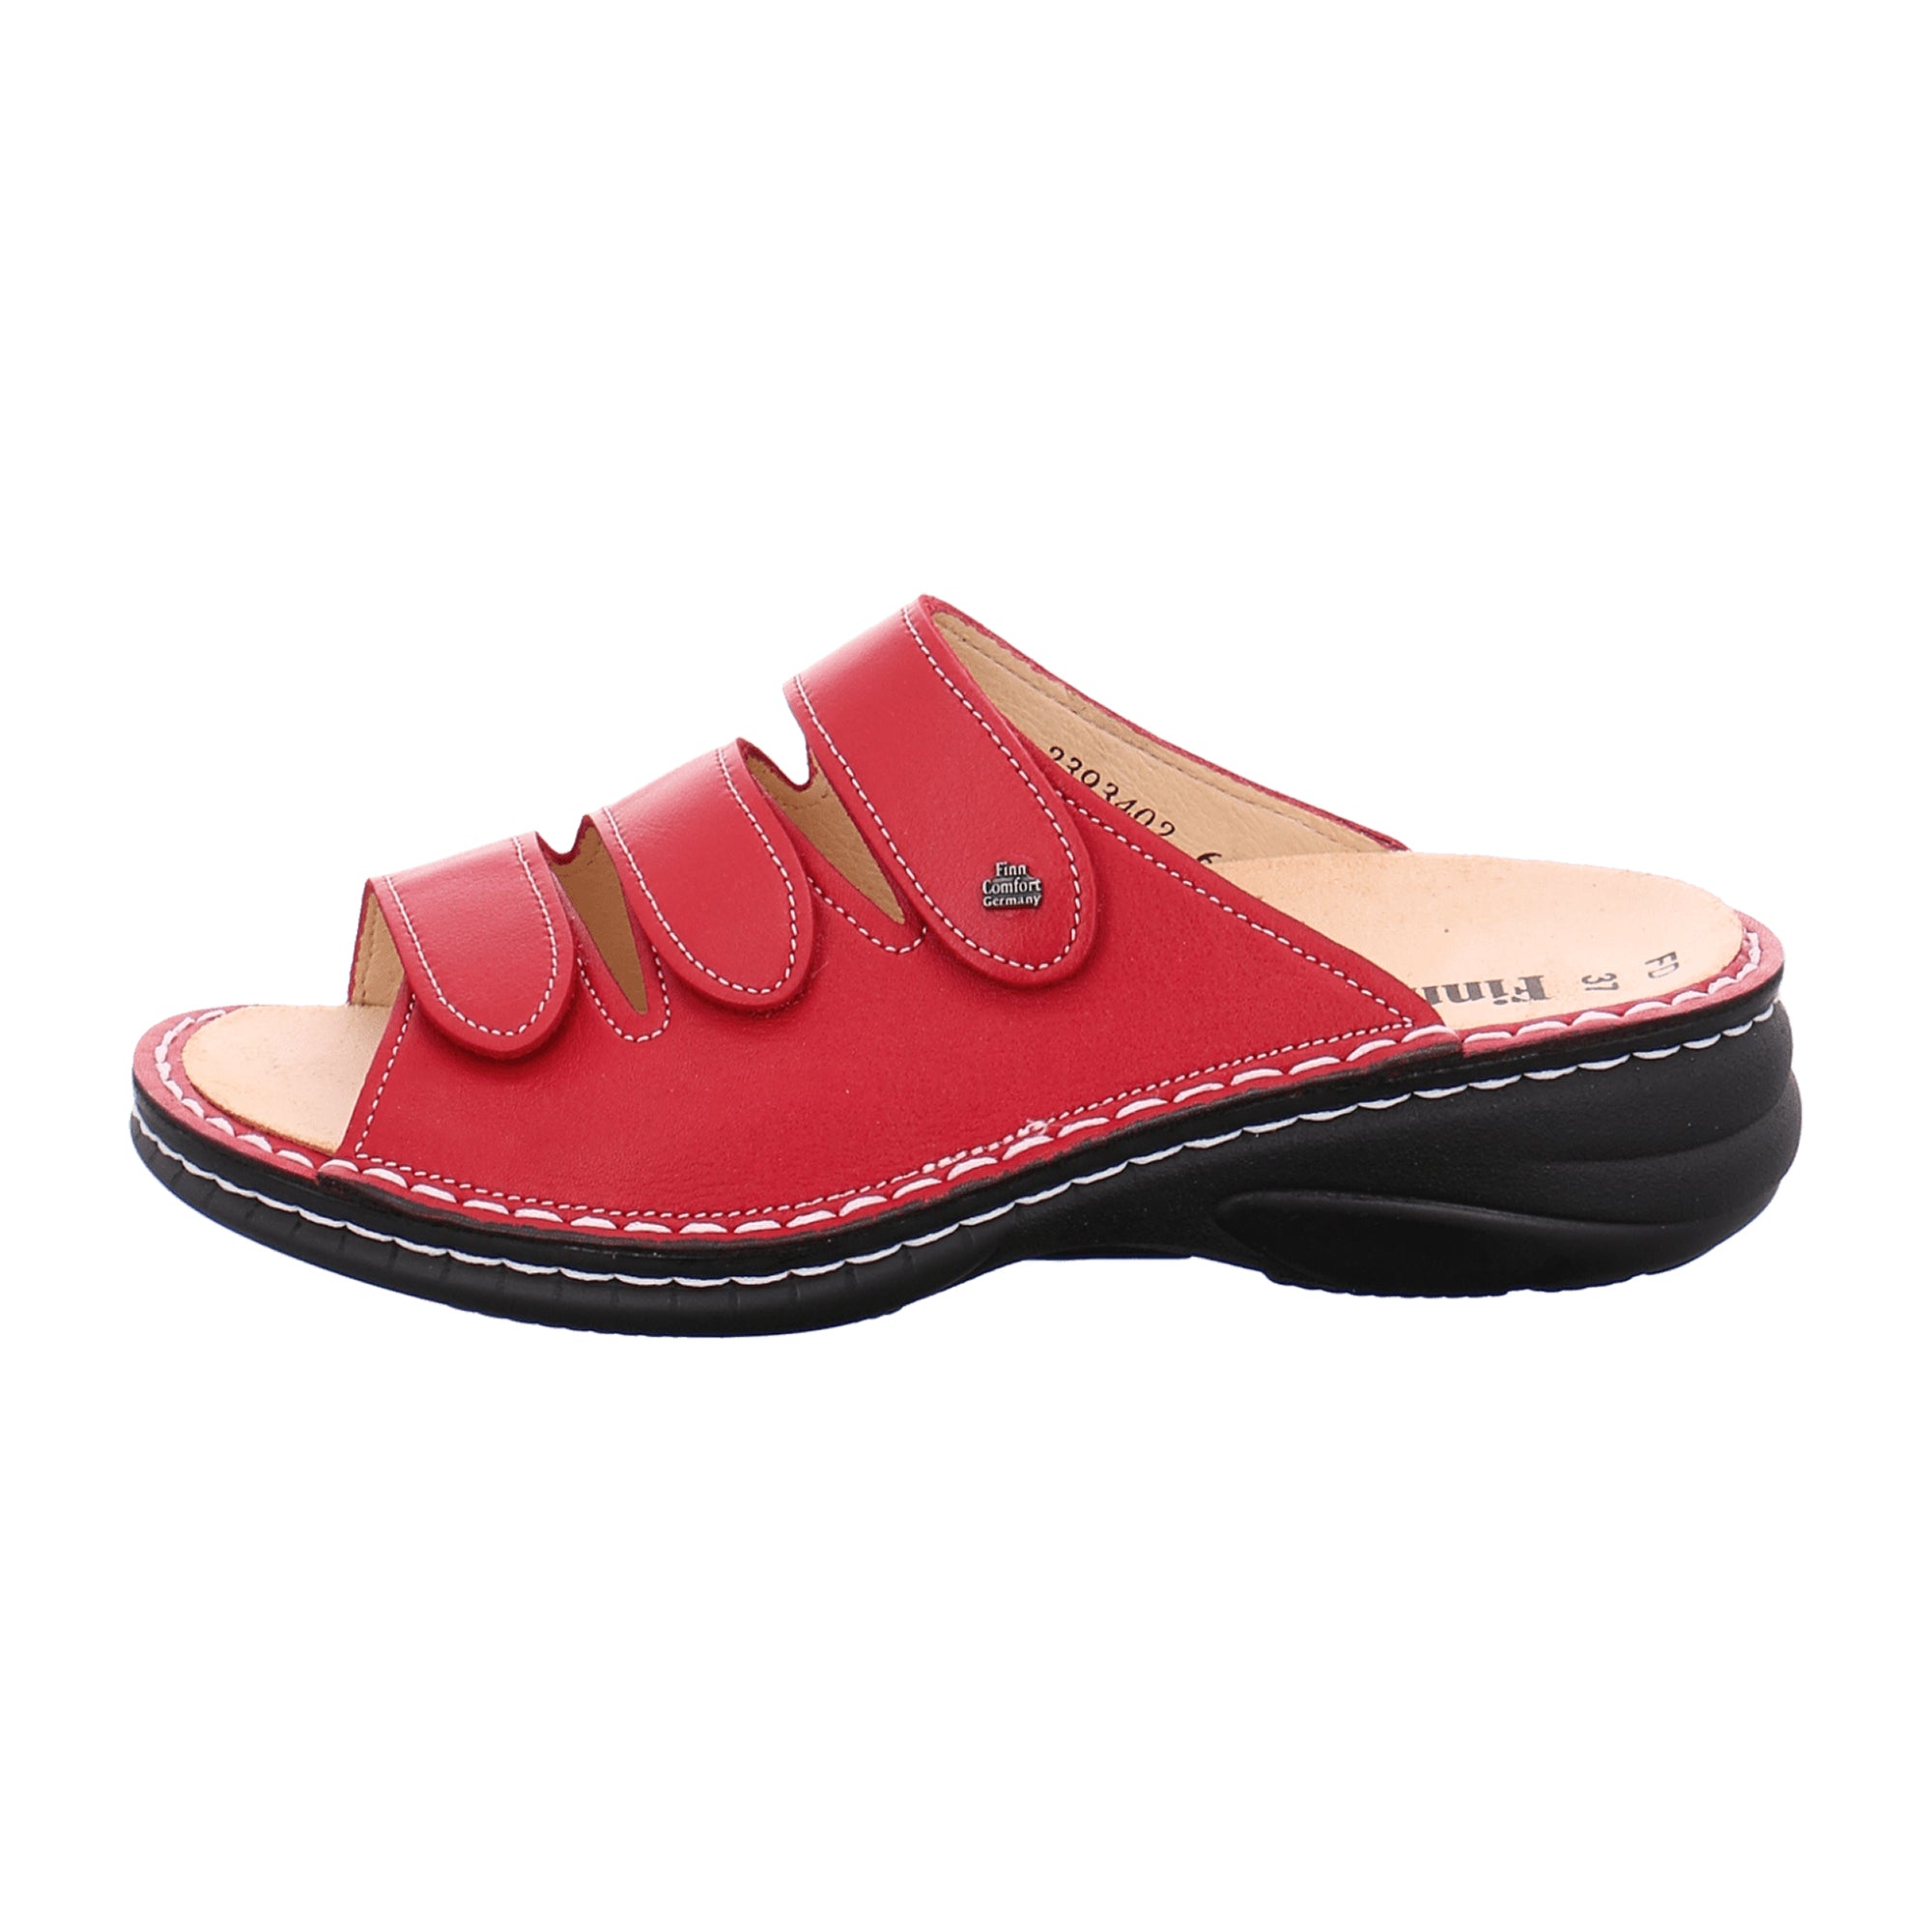 Finn Comfort Hellas Red Shoes for Women, Comfortable and Durable - Model 2620-60442